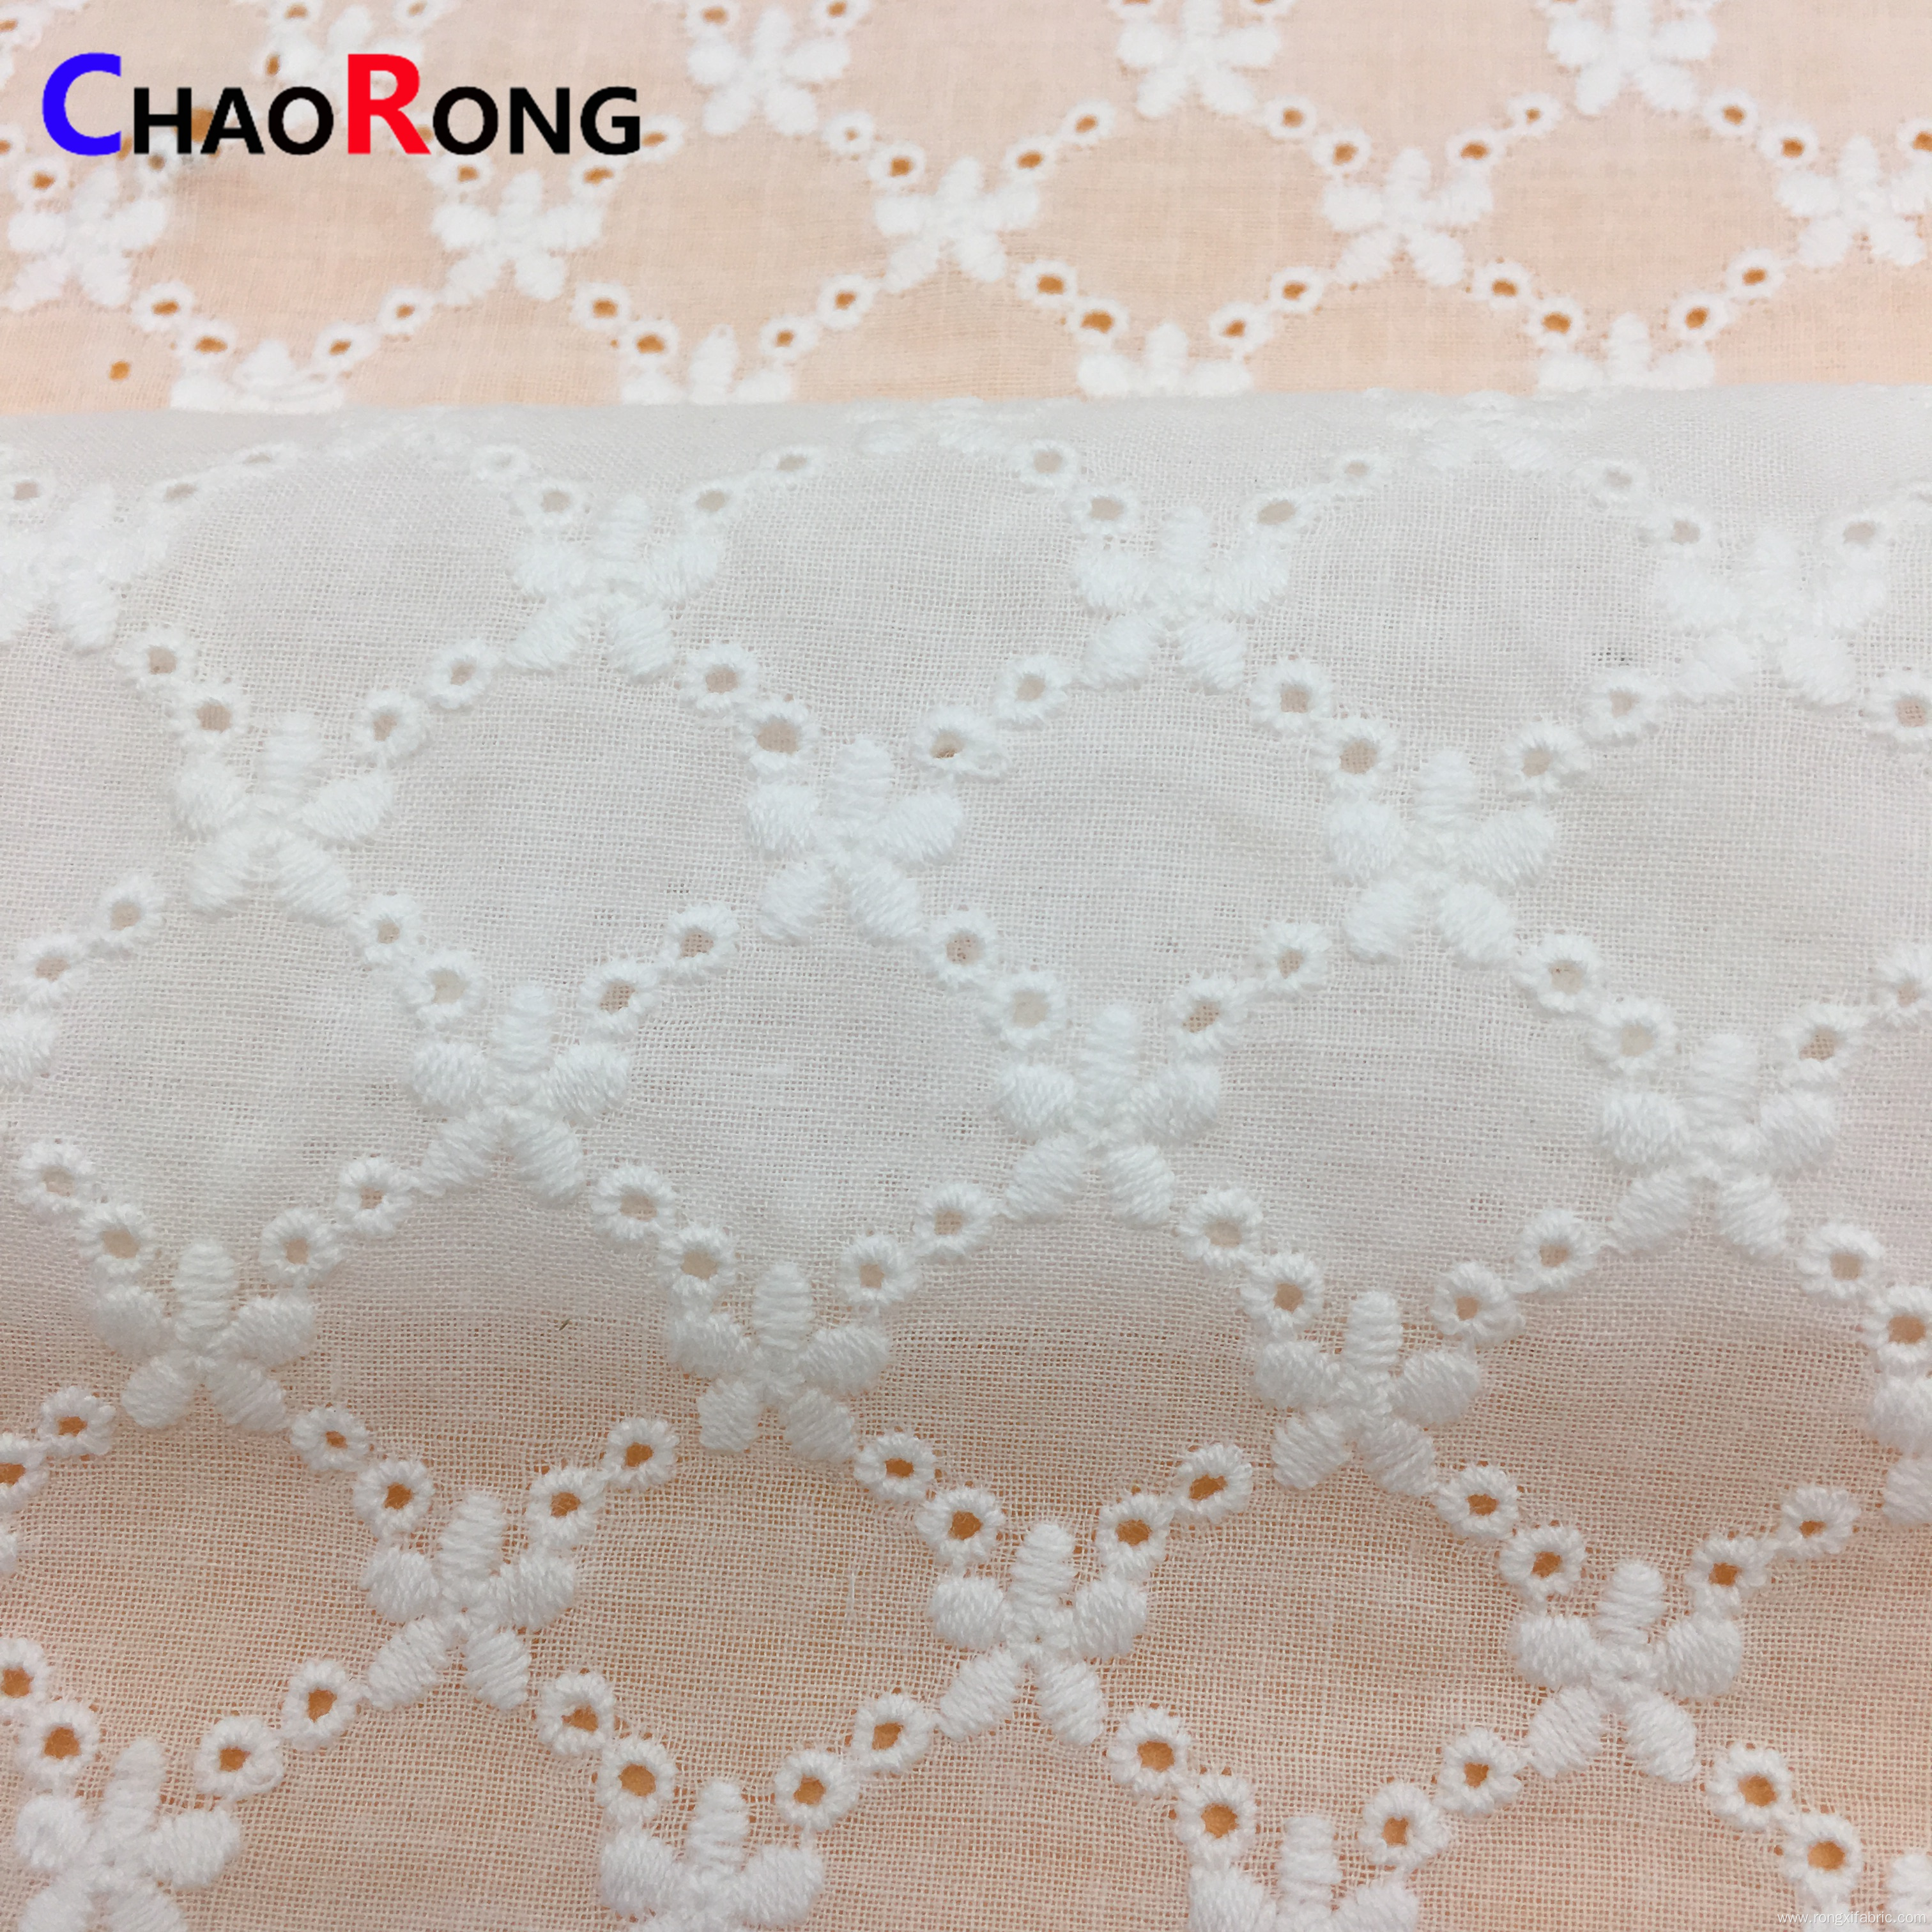 Professional Cotton Flower Fabric With CE Certificate